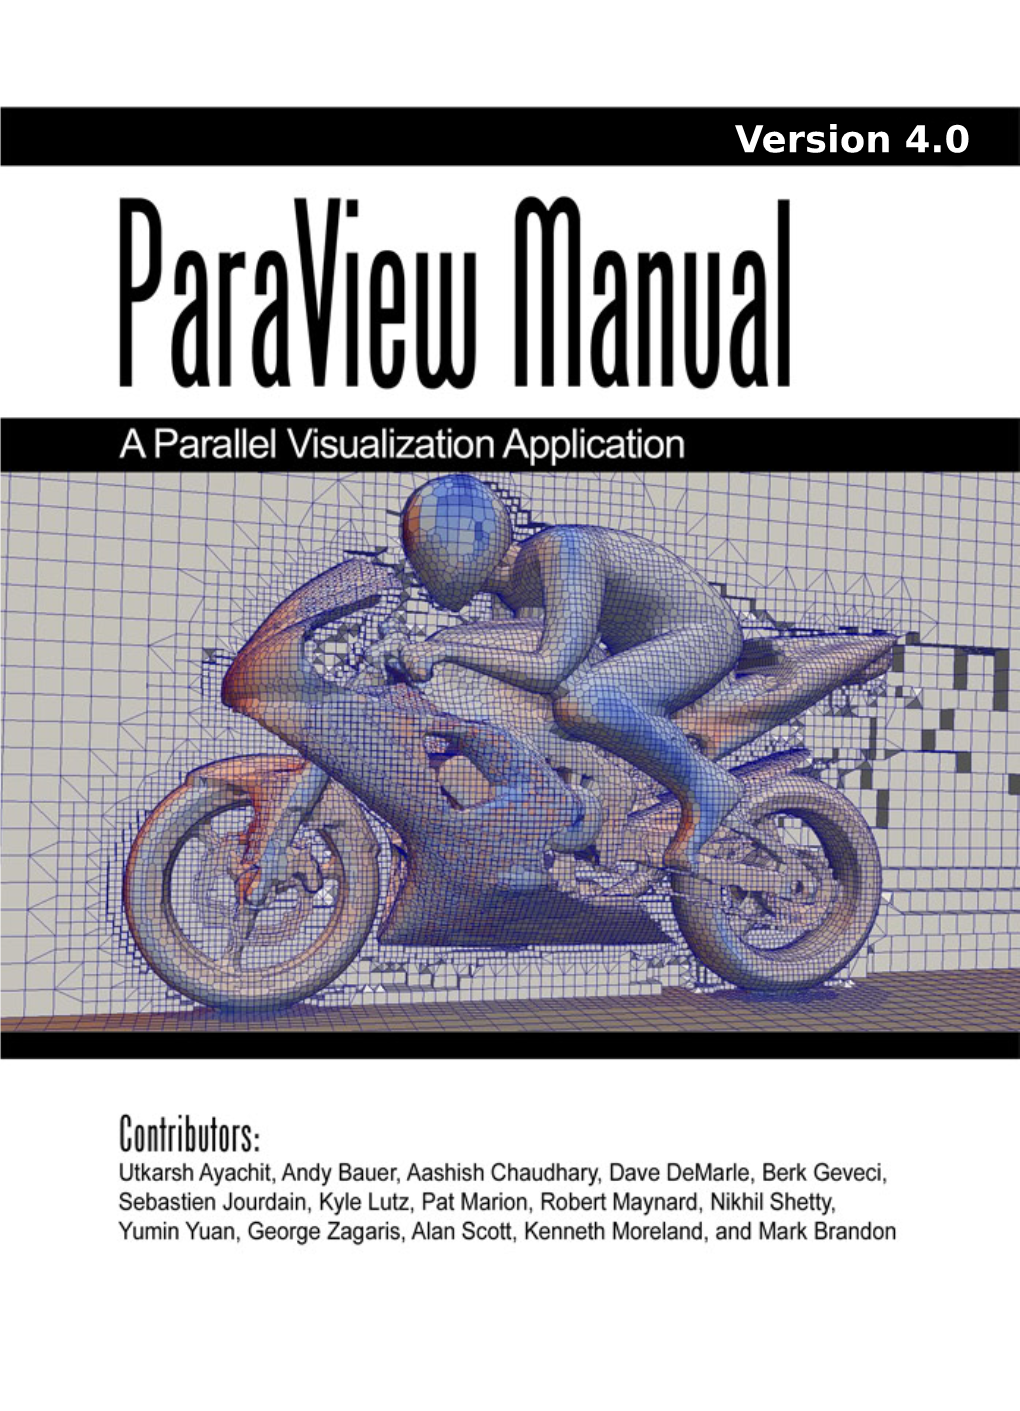 Paraview and Python Paraview Offers Rich Scripting Support Through Python